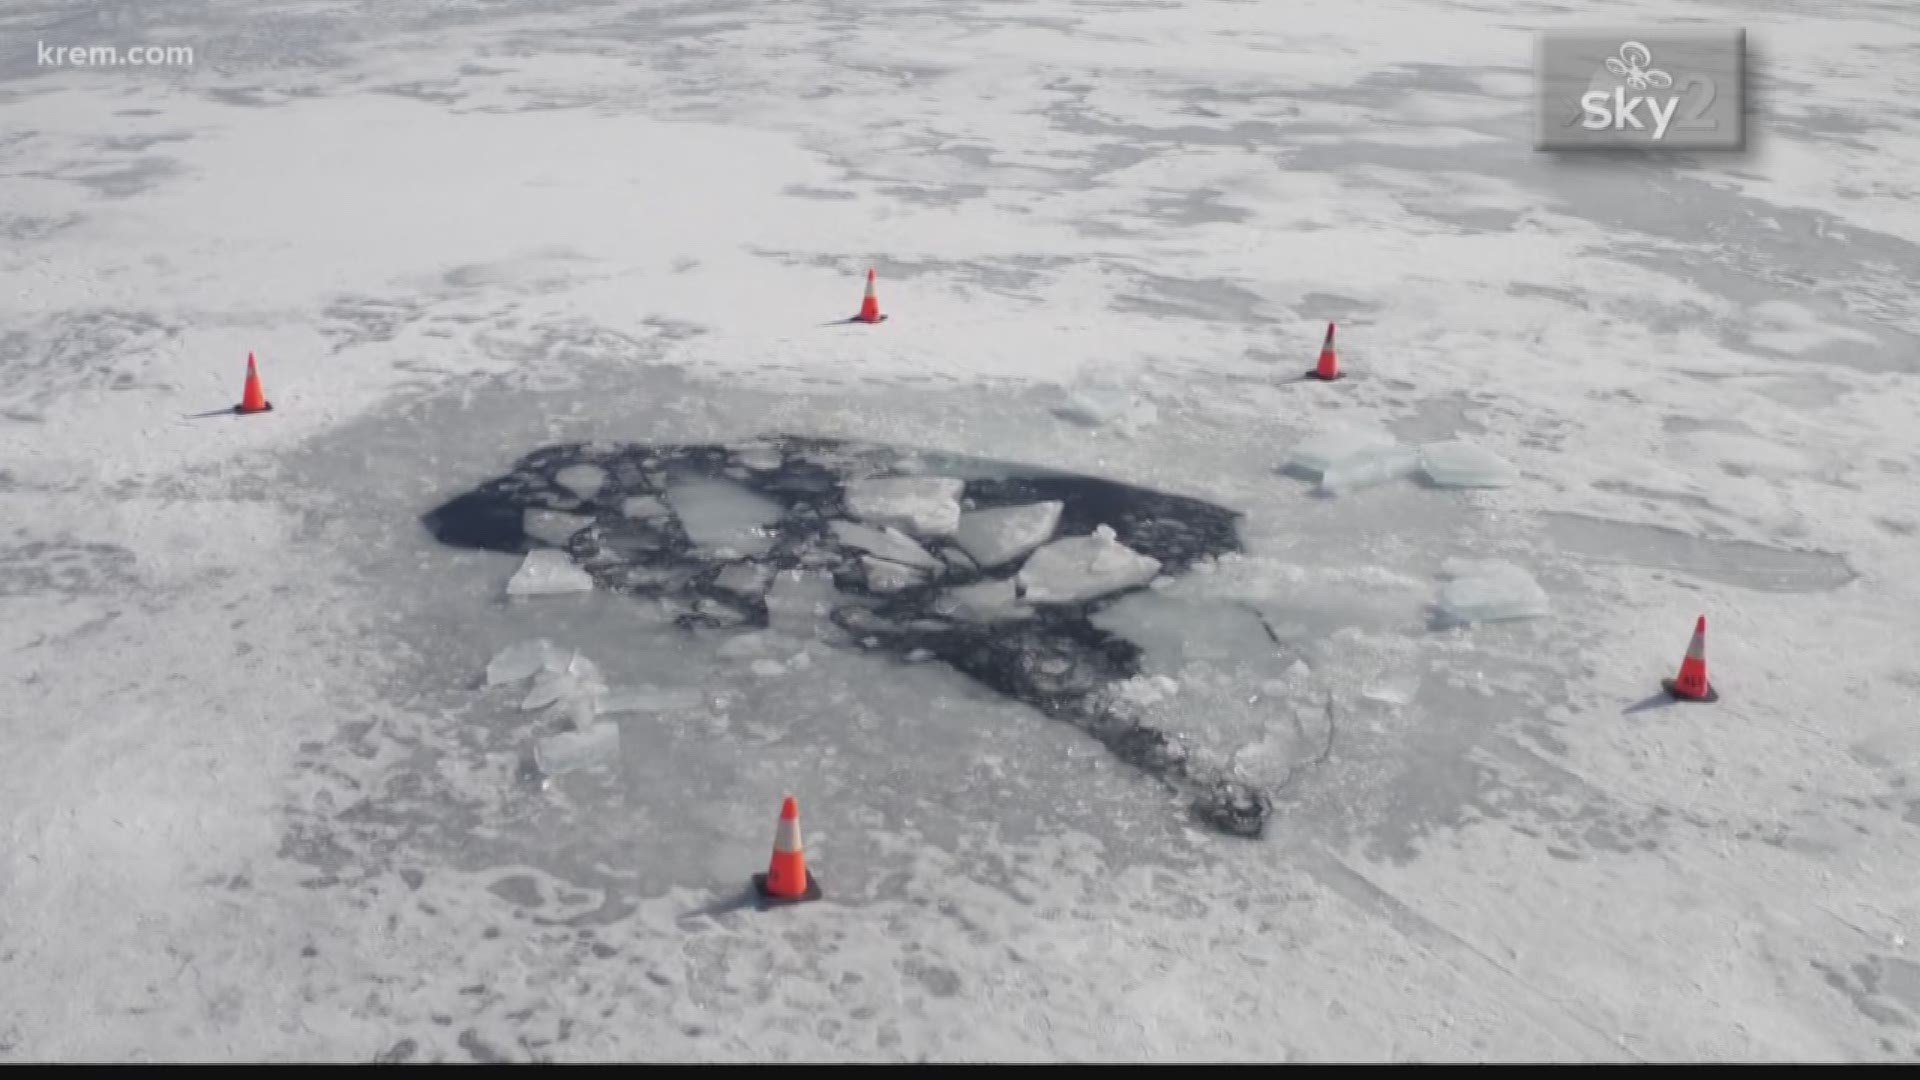 KREM Reporter Taylor Viydo visited Hayden Lake, where a man drove 650 feet before his car started breaking through the ice.